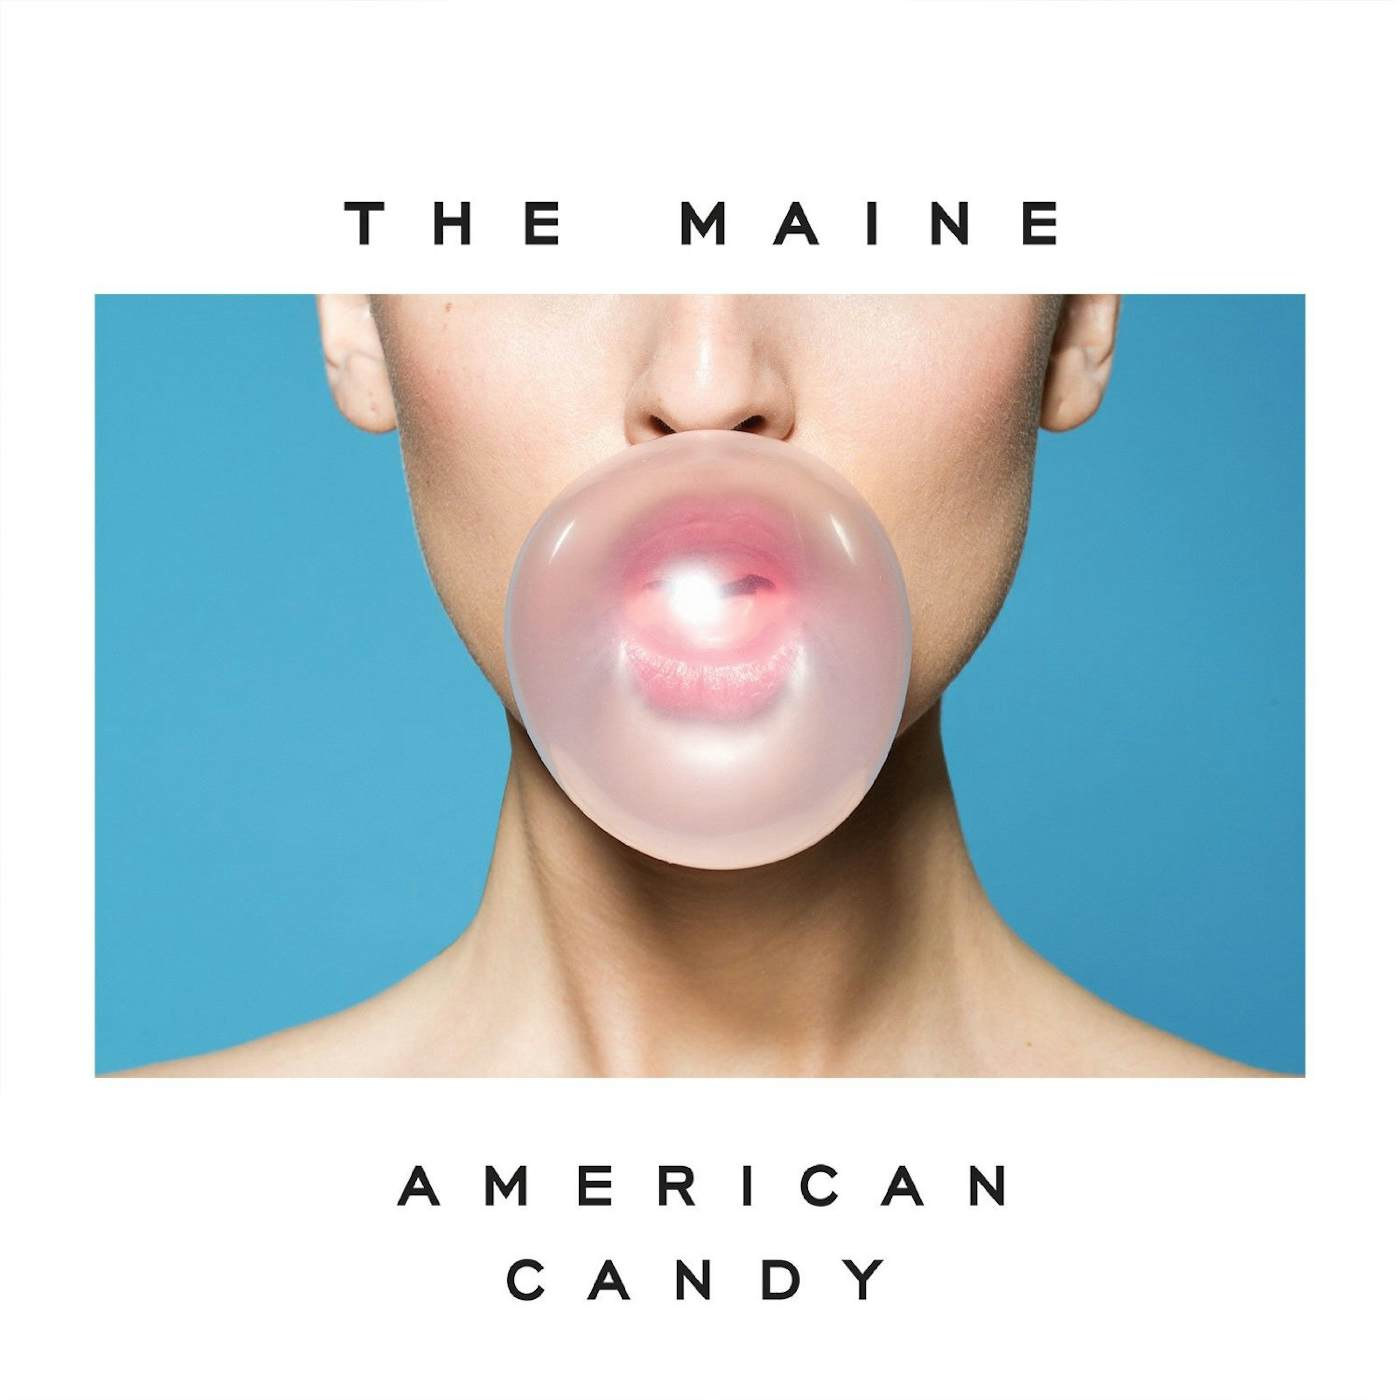 The Maine American Candy Vinyl Record